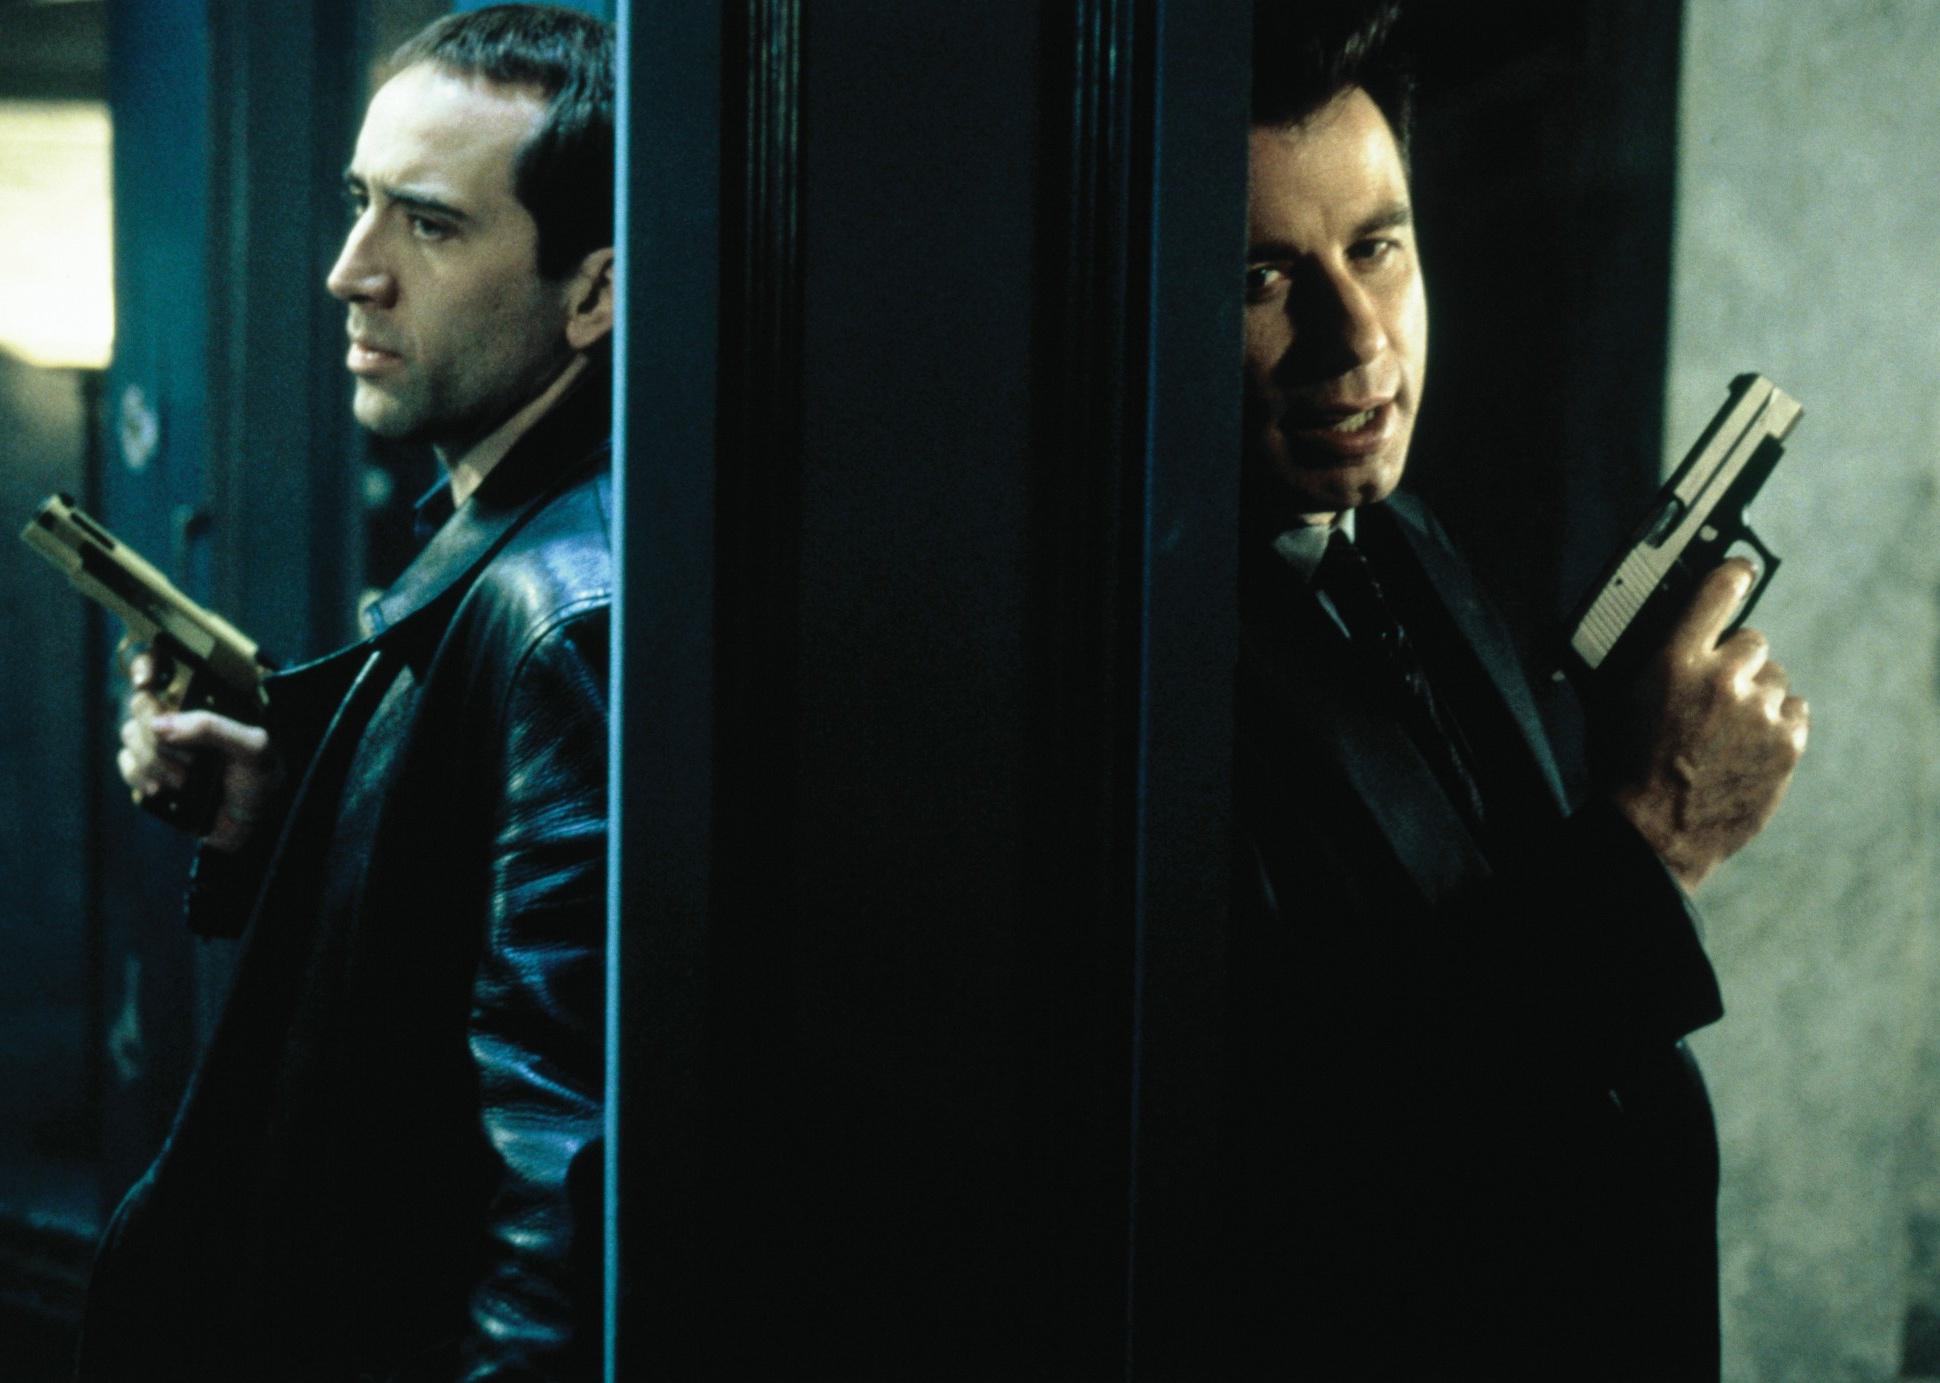 Nicolas Cage and John Travolta, both holding guns, stand back to back against walls.